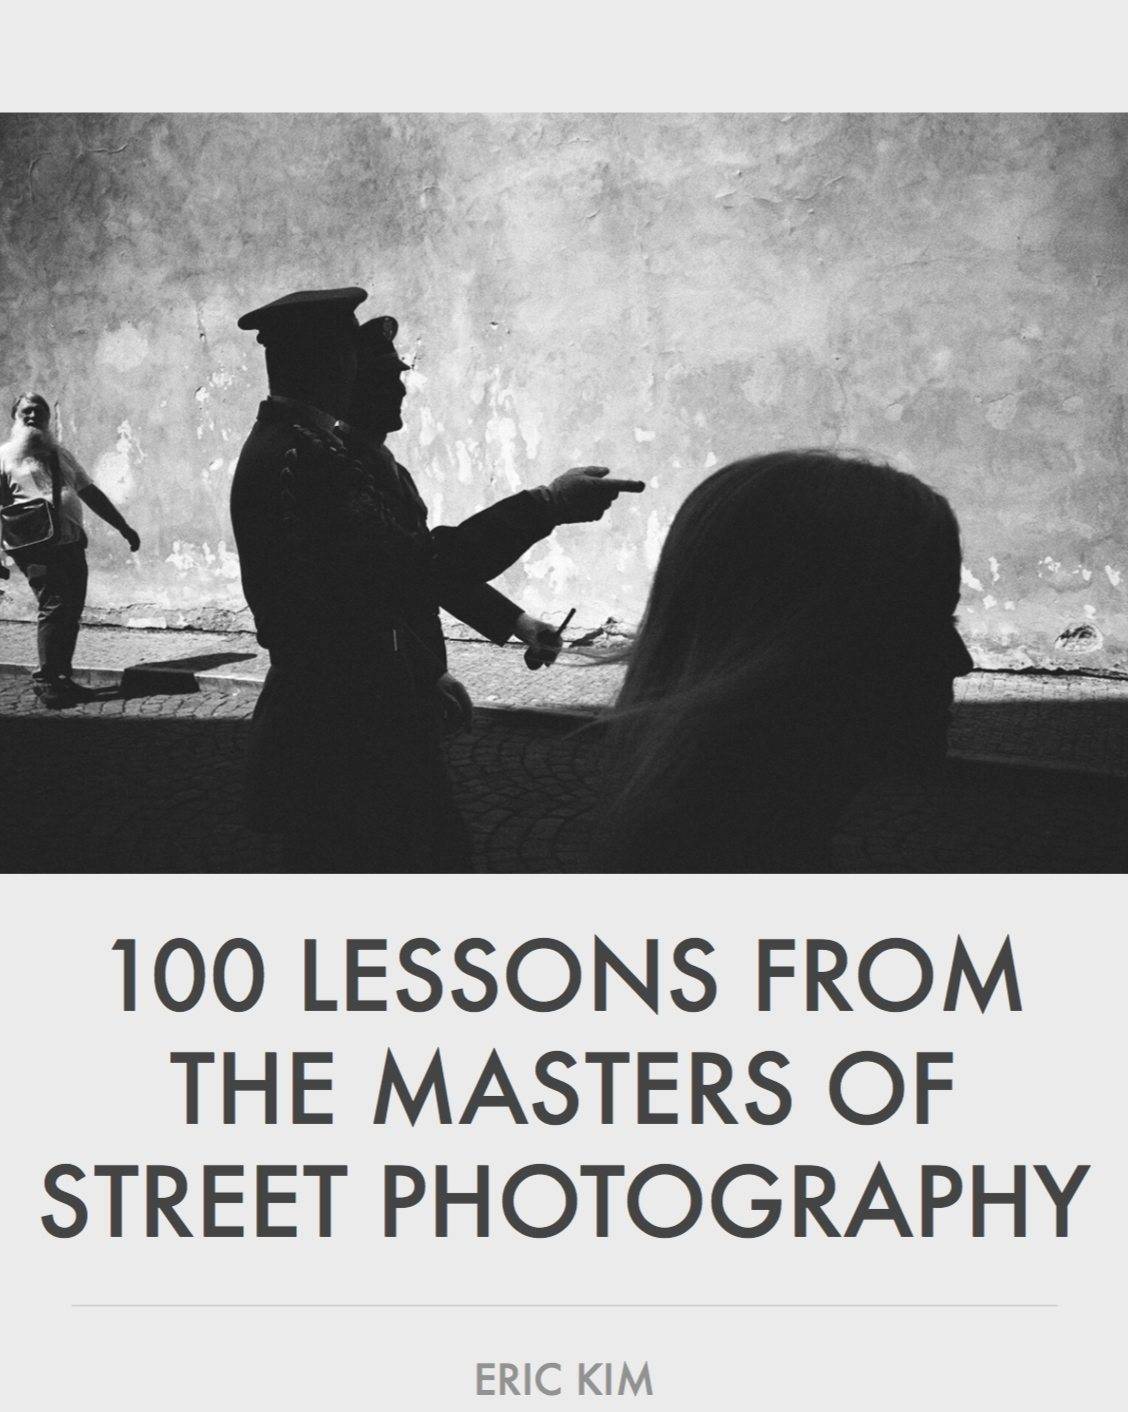 Street Photography e-Book - Eric Kim 100 Lessons from the masters of Street Photography